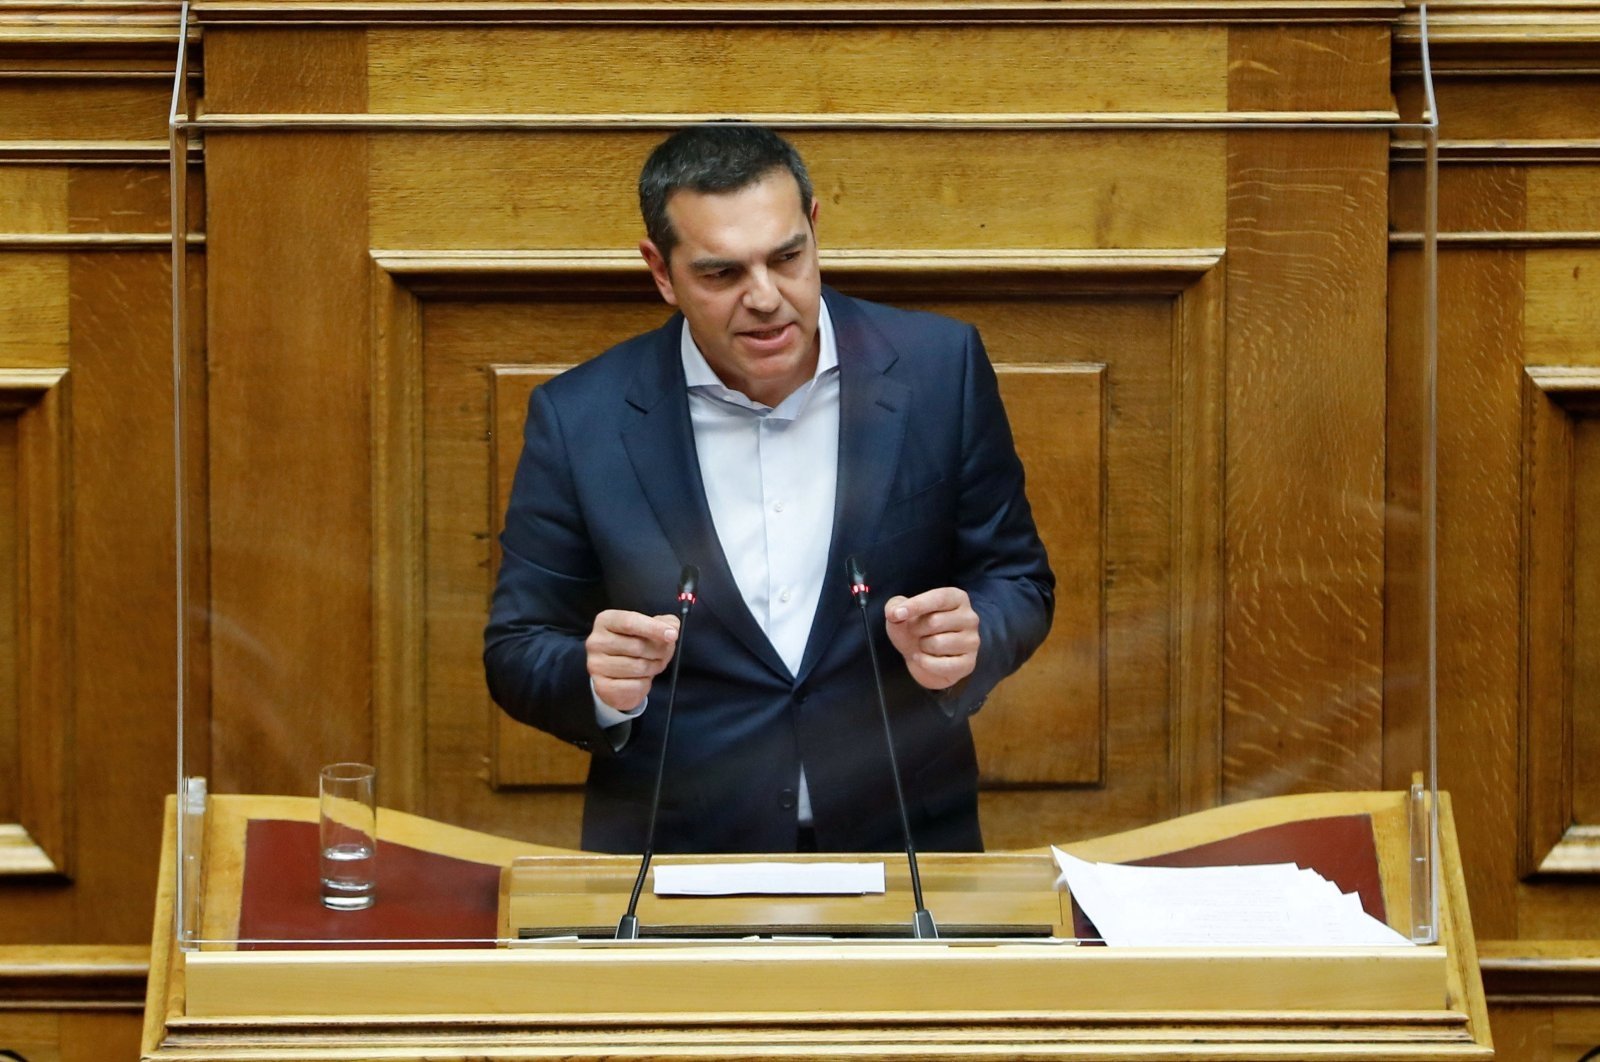 SYRIZA party leader Alexis Tsipras speaks during a parliamentary session before a confidence vote in Athens, Greece, Jan. 30, 2022. (Reuters Photo)